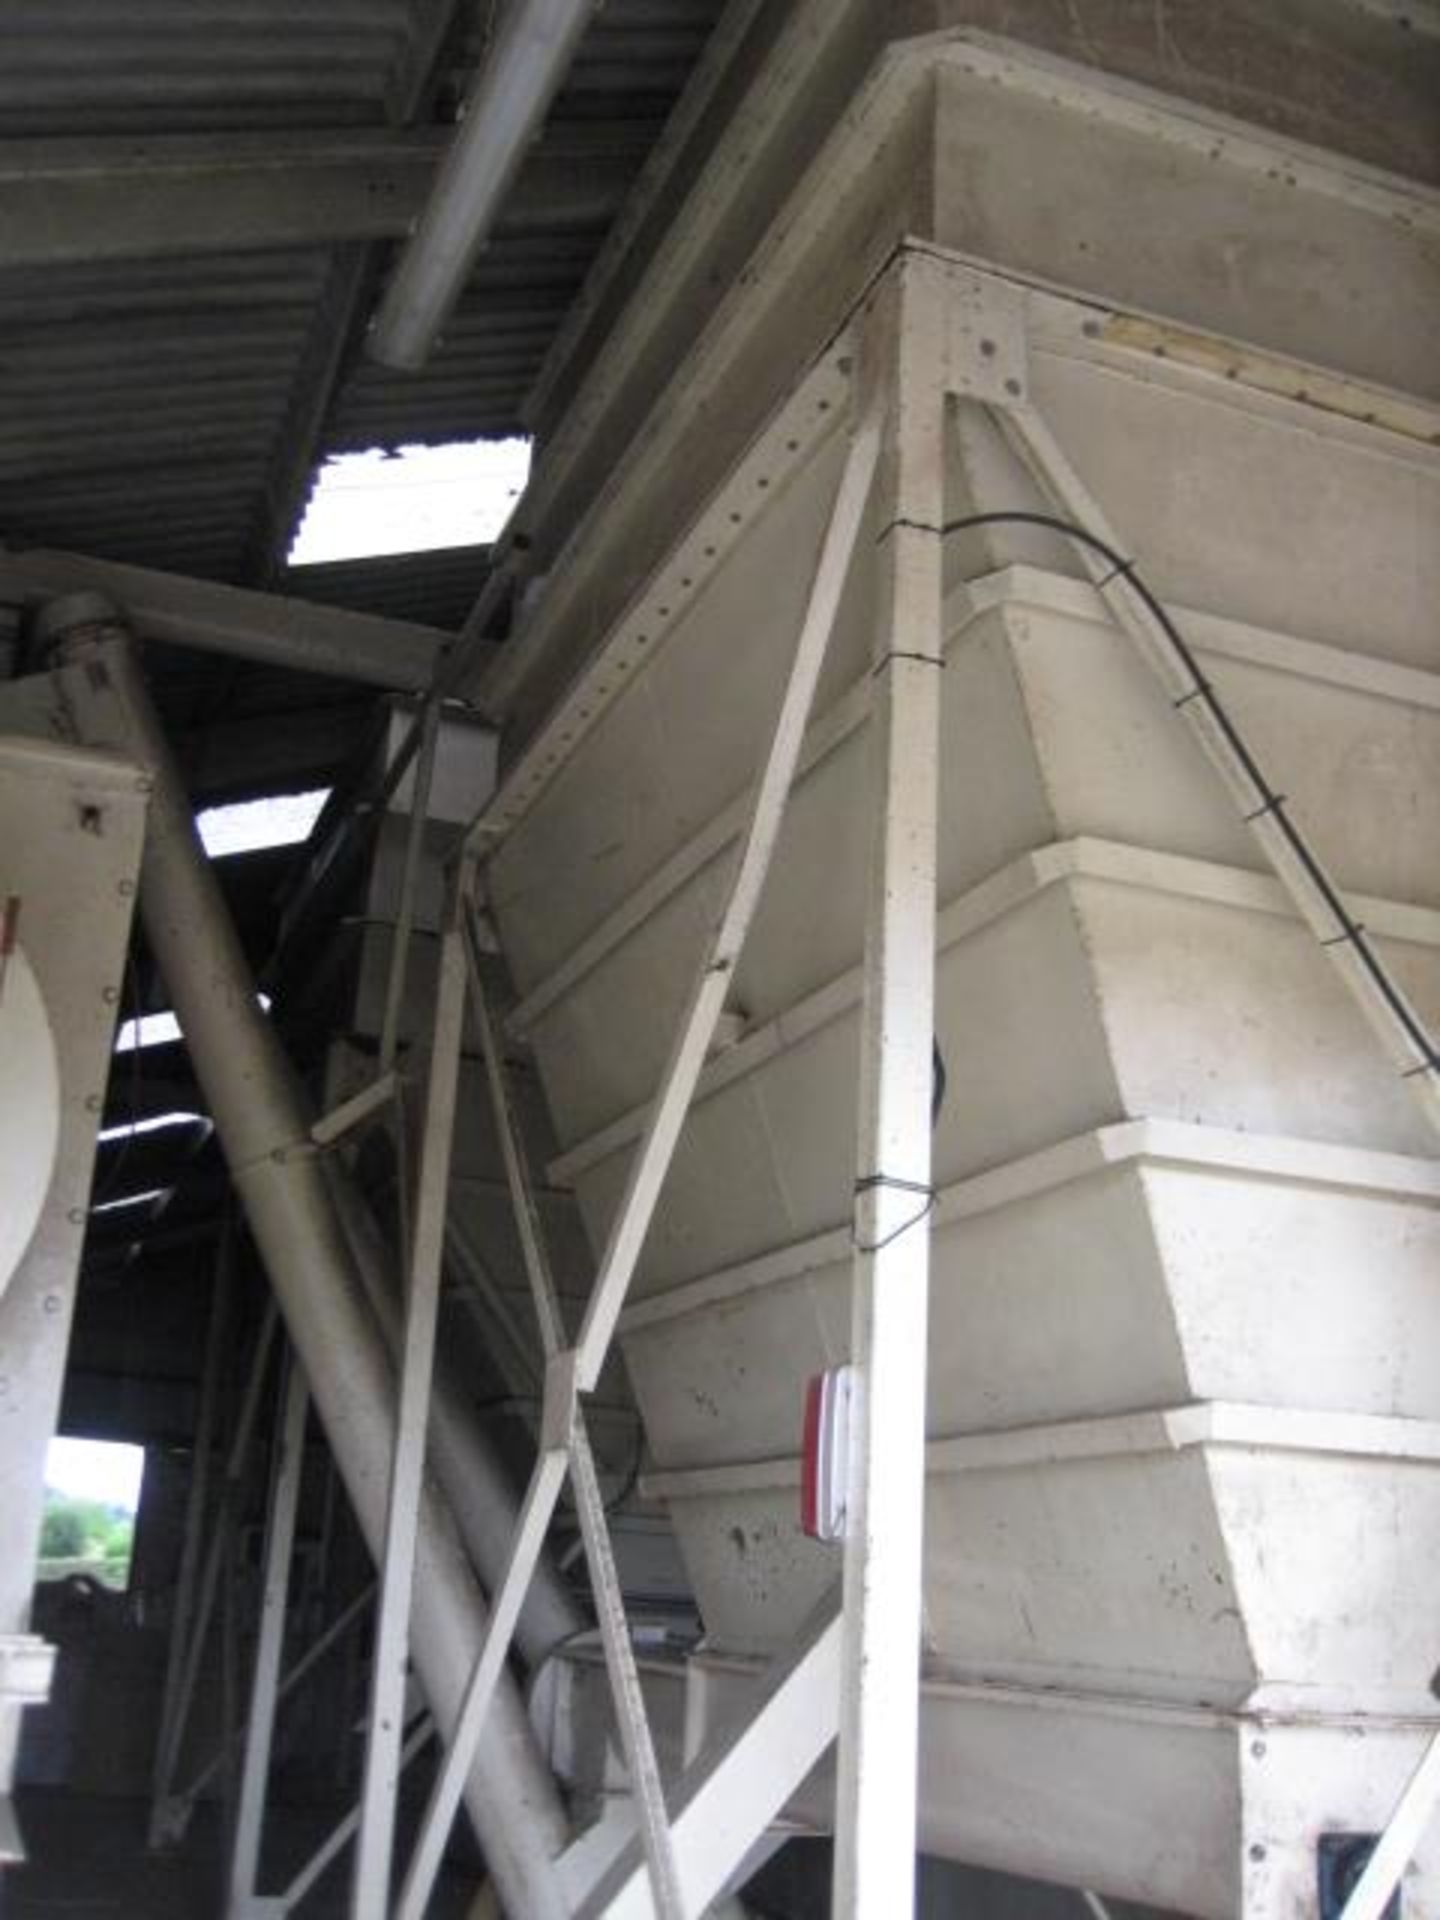 Storage Hopper – Two Hoppers, with tapered screw dischargers on the outlets. The hoppers are 3.2M - Image 7 of 7